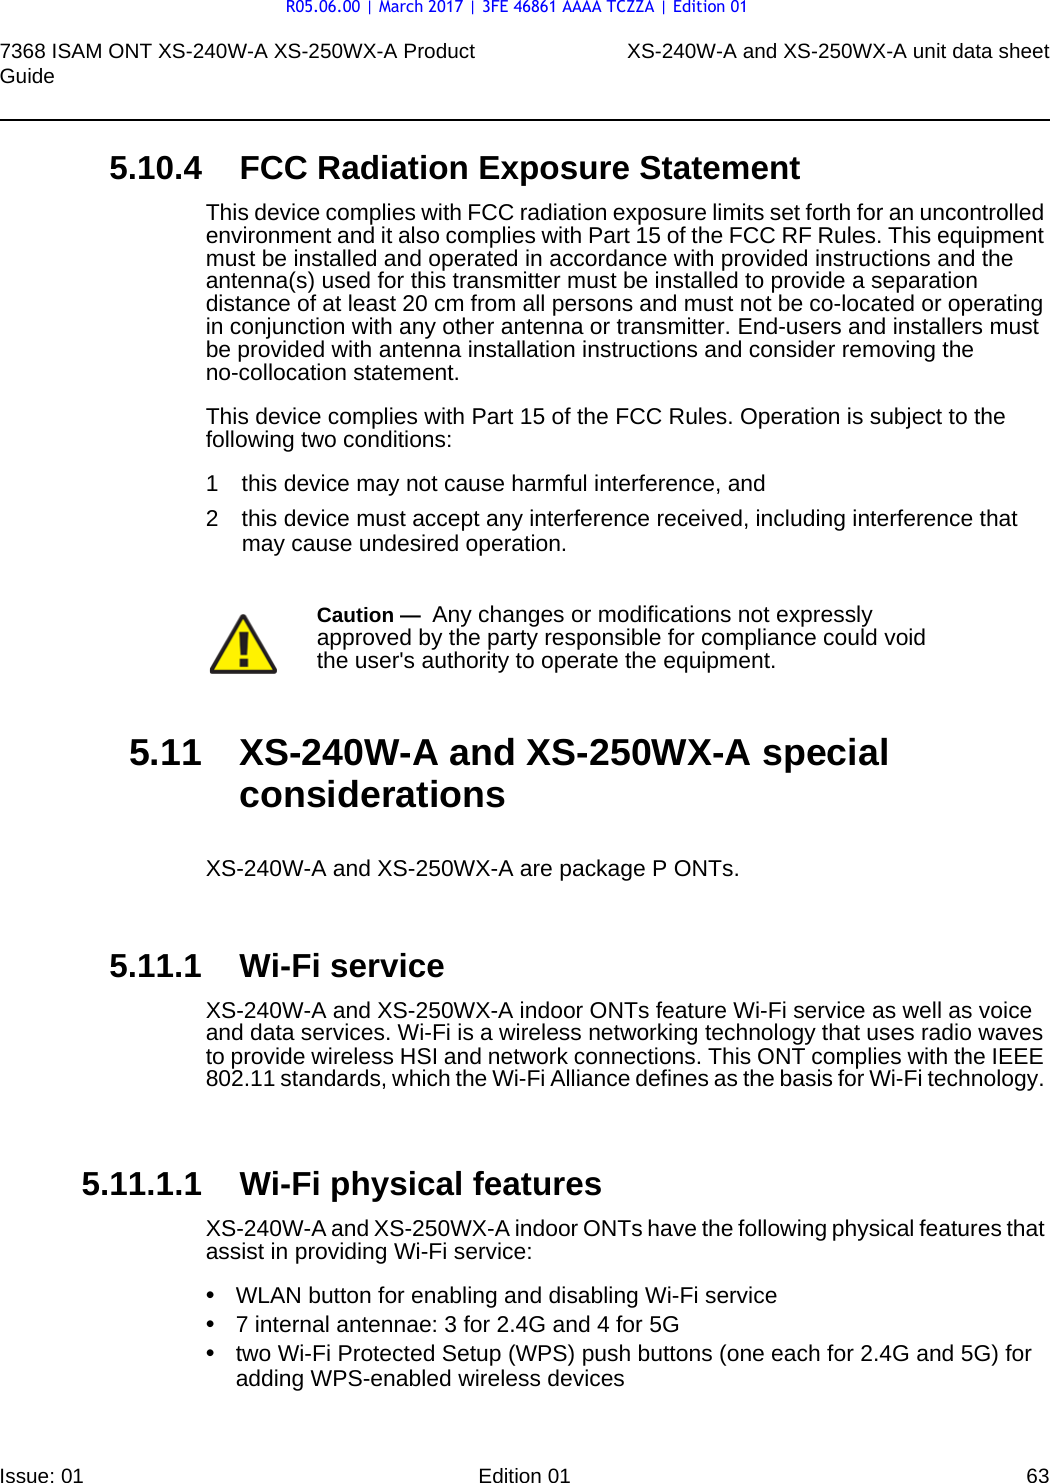 7368 ISAM ONT XS-240W-A XS-250WX-A Product Guide XS-240W-A and XS-250WX-A unit data sheetIssue: 01 Edition 01 63 5.10.4 FCC Radiation Exposure StatementThis device complies with FCC radiation exposure limits set forth for an uncontrolled environment and it also complies with Part 15 of the FCC RF Rules. This equipment must be installed and operated in accordance with provided instructions and the antenna(s) used for this transmitter must be installed to provide a separation distance of at least 20 cm from all persons and must not be co-located or operating in conjunction with any other antenna or transmitter. End-users and installers must be provided with antenna installation instructions and consider removing the no-collocation statement. This device complies with Part 15 of the FCC Rules. Operation is subject to the following two conditions: 1 this device may not cause harmful interference, and 2 this device must accept any interference received, including interference that may cause undesired operation. 5.11 XS-240W-A and XS-250WX-A special considerationsXS-240W-A and XS-250WX-A are package P ONTs.5.11.1 Wi-Fi serviceXS-240W-A and XS-250WX-A indoor ONTs feature Wi-Fi service as well as voice and data services. Wi-Fi is a wireless networking technology that uses radio waves to provide wireless HSI and network connections. This ONT complies with the IEEE 802.11 standards, which the Wi-Fi Alliance defines as the basis for Wi-Fi technology. 5.11.1.1 Wi-Fi physical featuresXS-240W-A and XS-250WX-A indoor ONTs have the following physical features that assist in providing Wi-Fi service: •WLAN button for enabling and disabling Wi-Fi service •7 internal antennae: 3 for 2.4G and 4 for 5G•two Wi-Fi Protected Setup (WPS) push buttons (one each for 2.4G and 5G) for adding WPS-enabled wireless devicesCaution —  Any changes or modifications not expressly approved by the party responsible for compliance could void the user&apos;s authority to operate the equipment. R05.06.00 | March 2017 | 3FE 46861 AAAA TCZZA | Edition 01